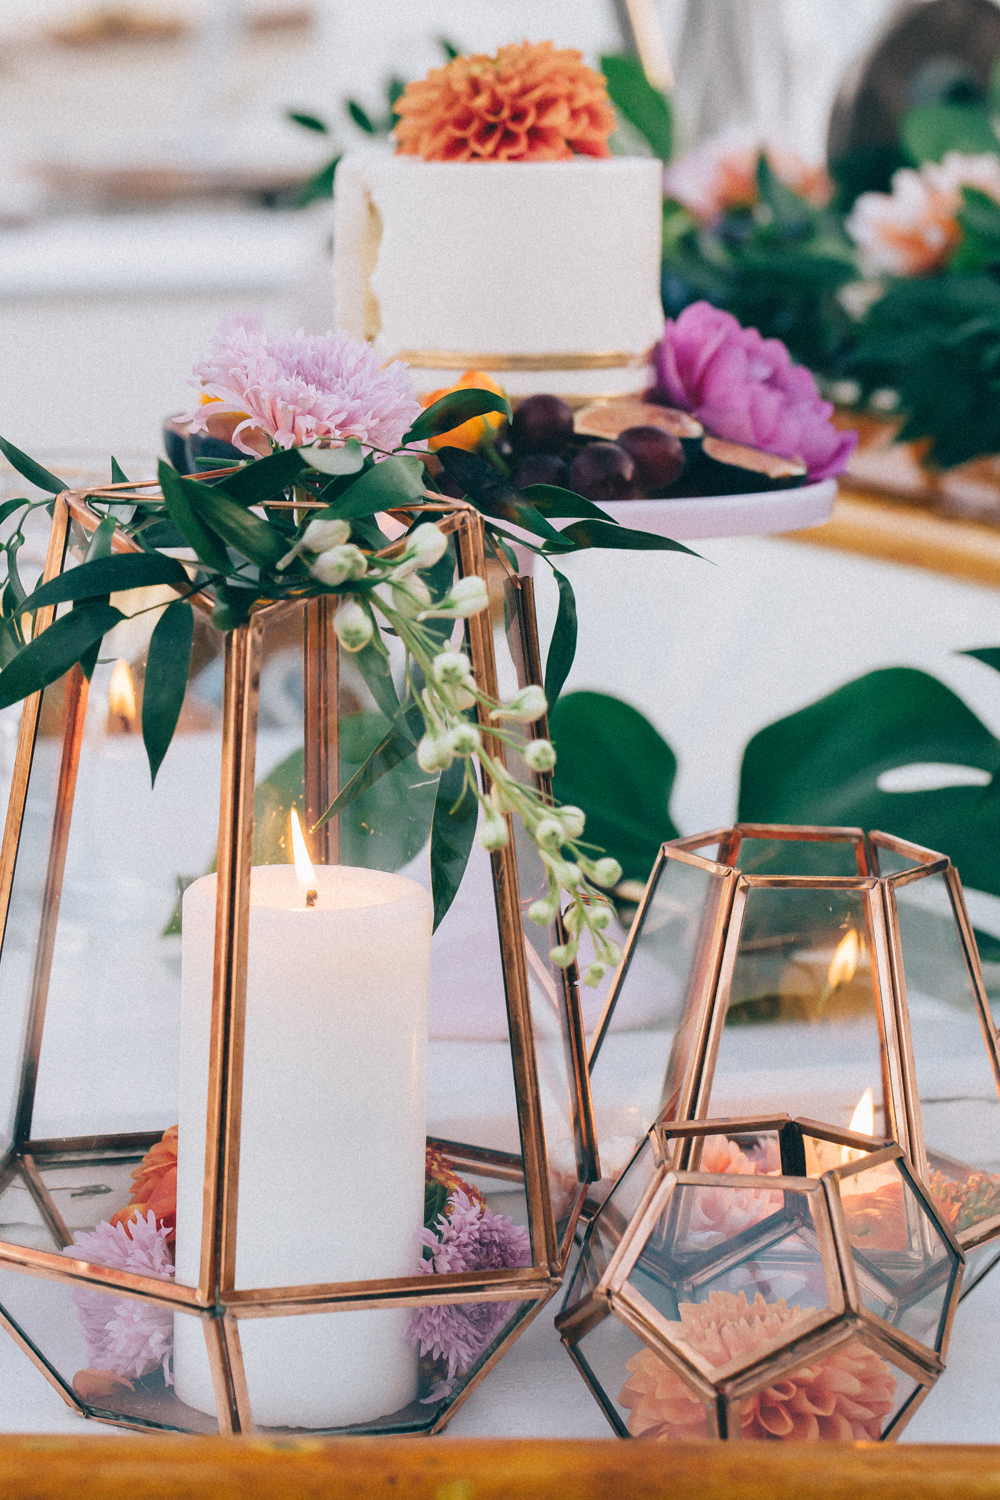 Geometric copper candle holder for a modern wedding centerpiece. // 15 Stunning Ways to Decorate with Candles // https://mysweetengagement.com